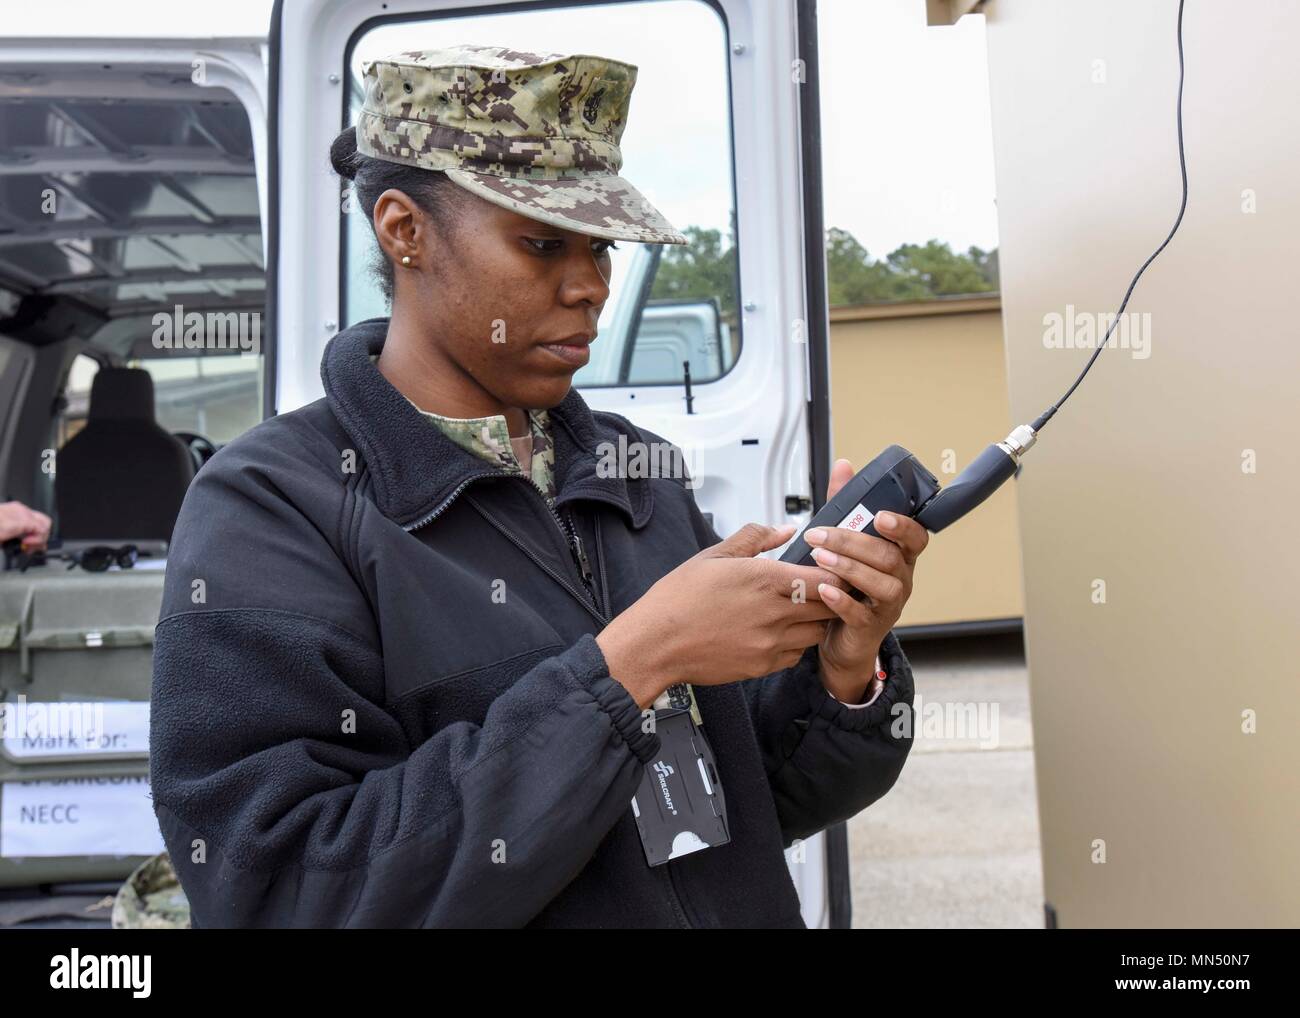 180410-N-YN937-011 VIRGINIA BEACH, Va. (April 10, 2018) – Chief Operations Specialist Sharon McQueen, from Birmingham, Alabama, assigned to Navy Expeditionary Combat Command (NECC), tests an Iridium satellite phone during NECC’s Defense Support of Civil Authorities (DSCA) scenario staff exercise on Joint Expeditionary Base Little Creek-Fort Story. DSCA events are designed to provide Department of Defense assets to civil authorities in response to requests for assistance for domestic emergencies. (U.S. Navy photo by Mass Communication Specialist 3rd Class Alan Lewis/Released) Stock Photo